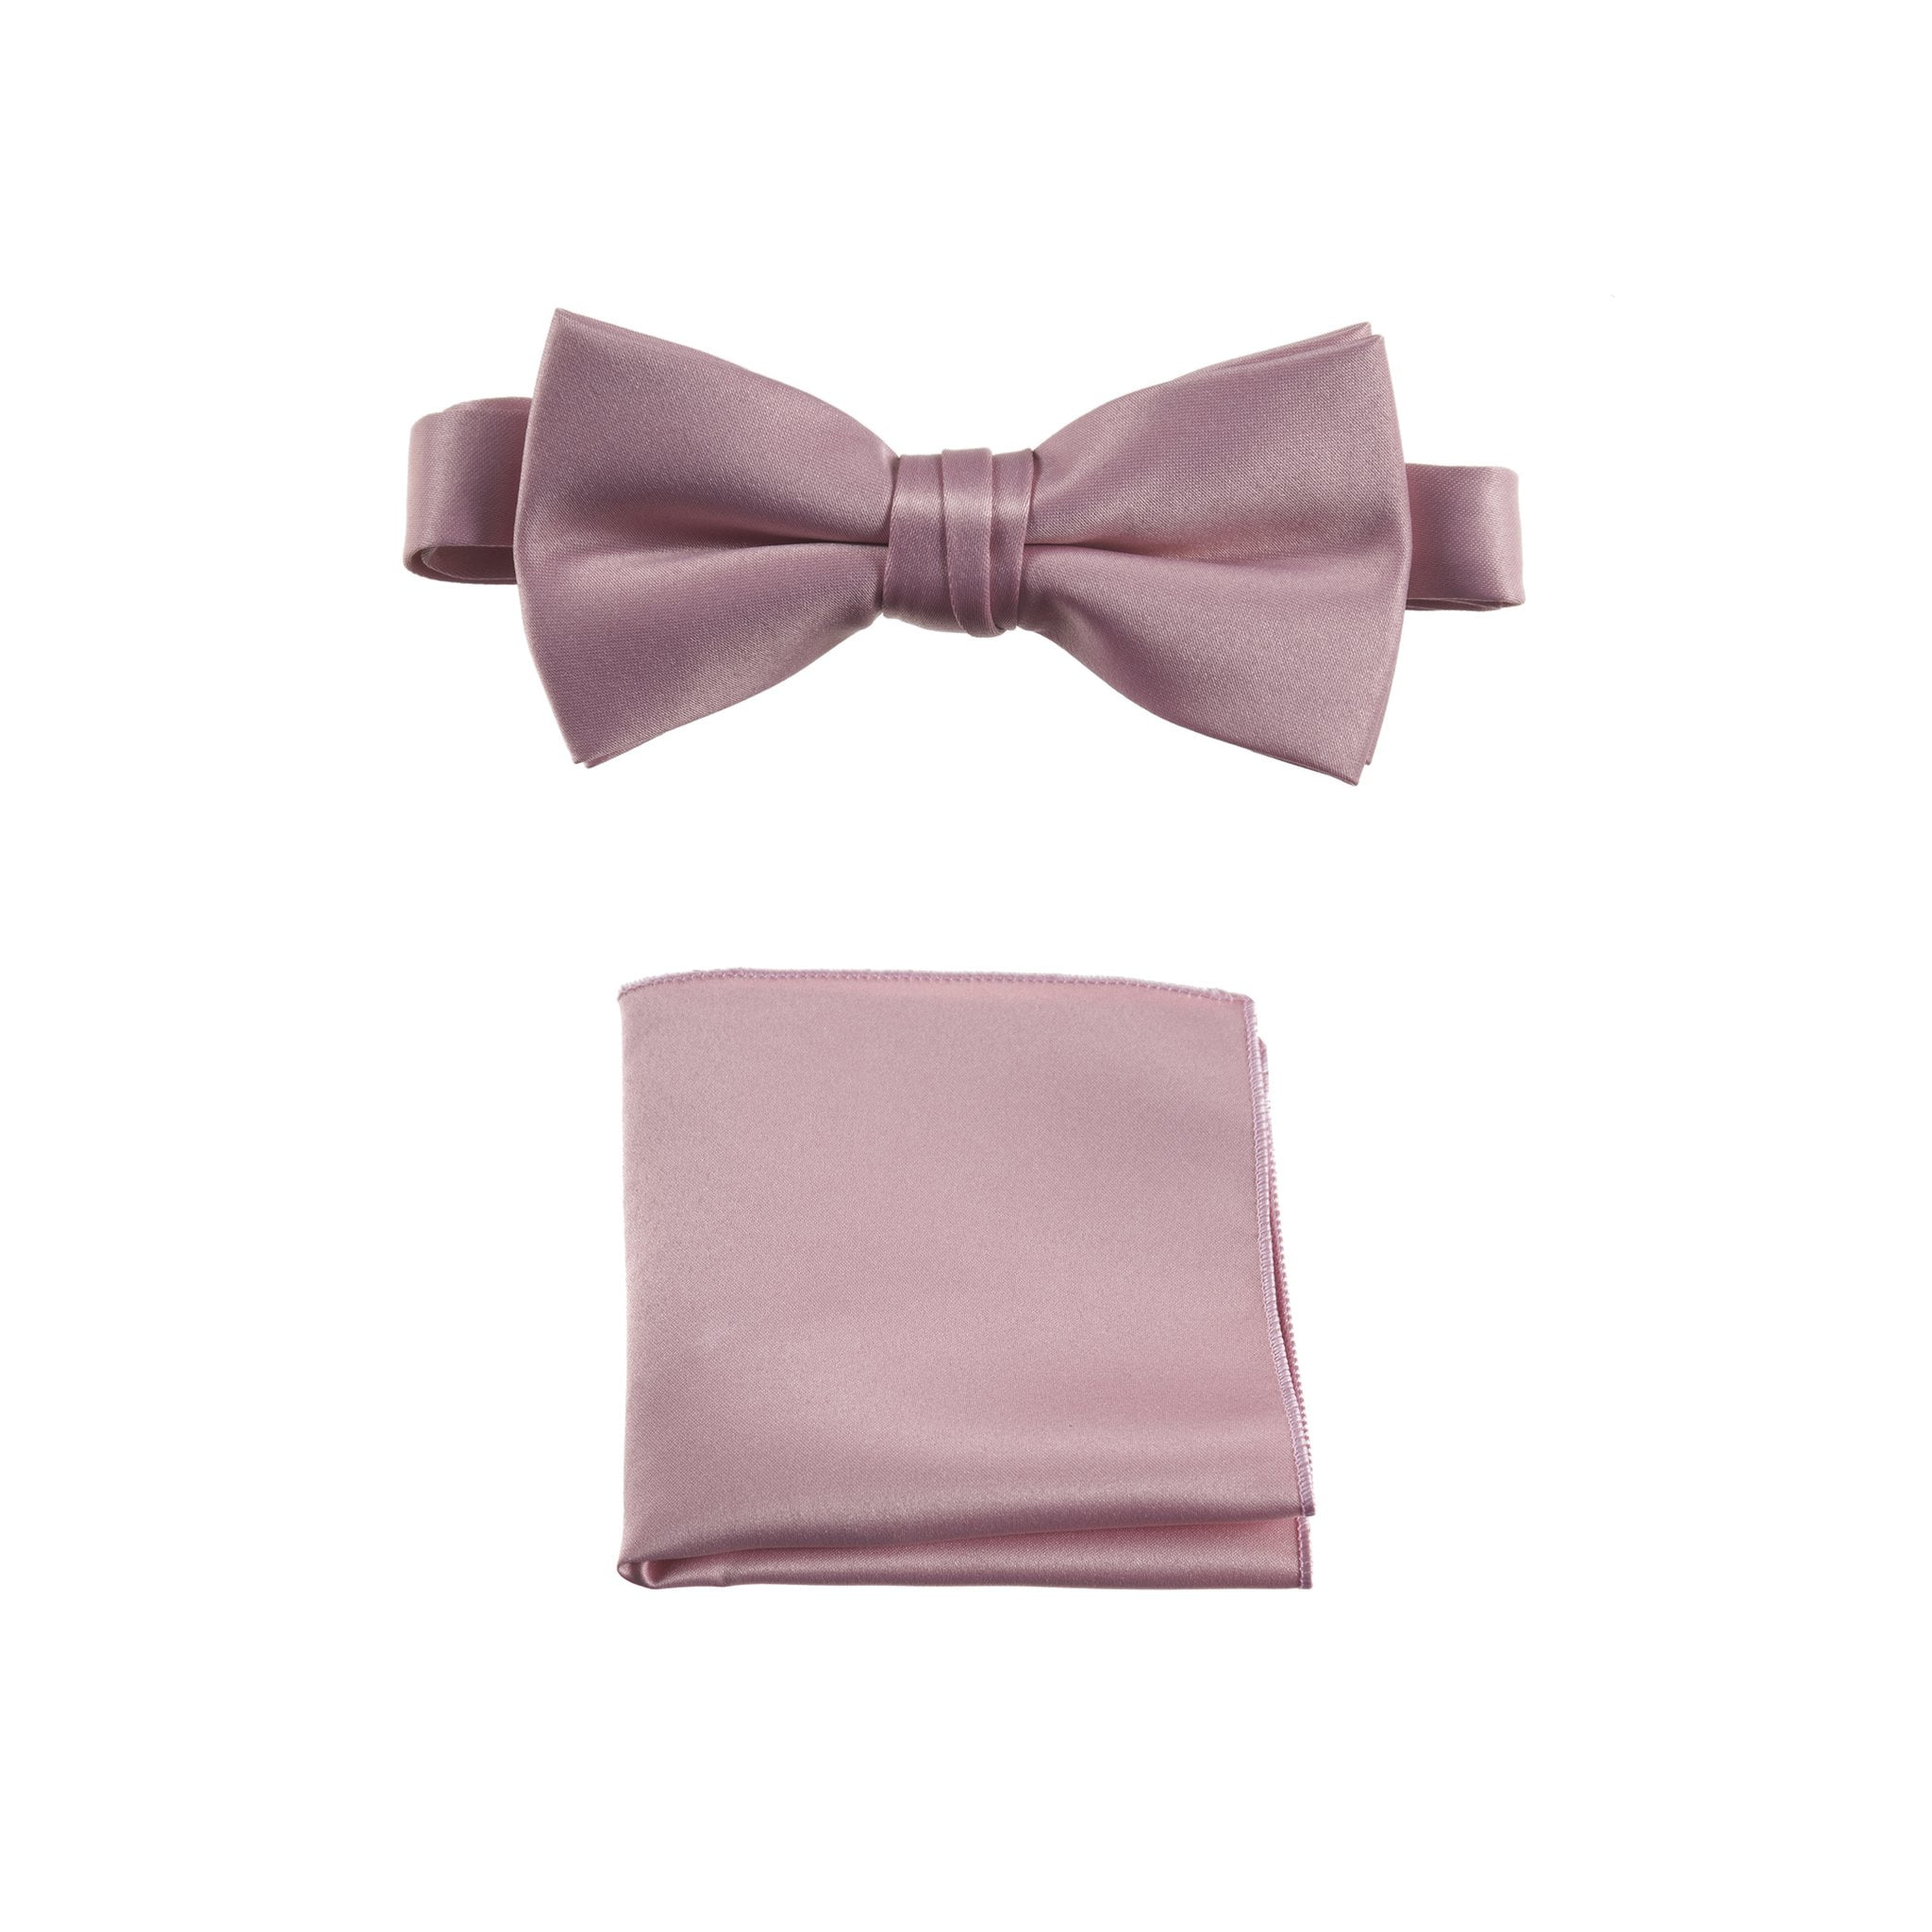 Details about   Men's Pre-tied Bow Tie & hankie set polyester pink stars formal prom wedding 